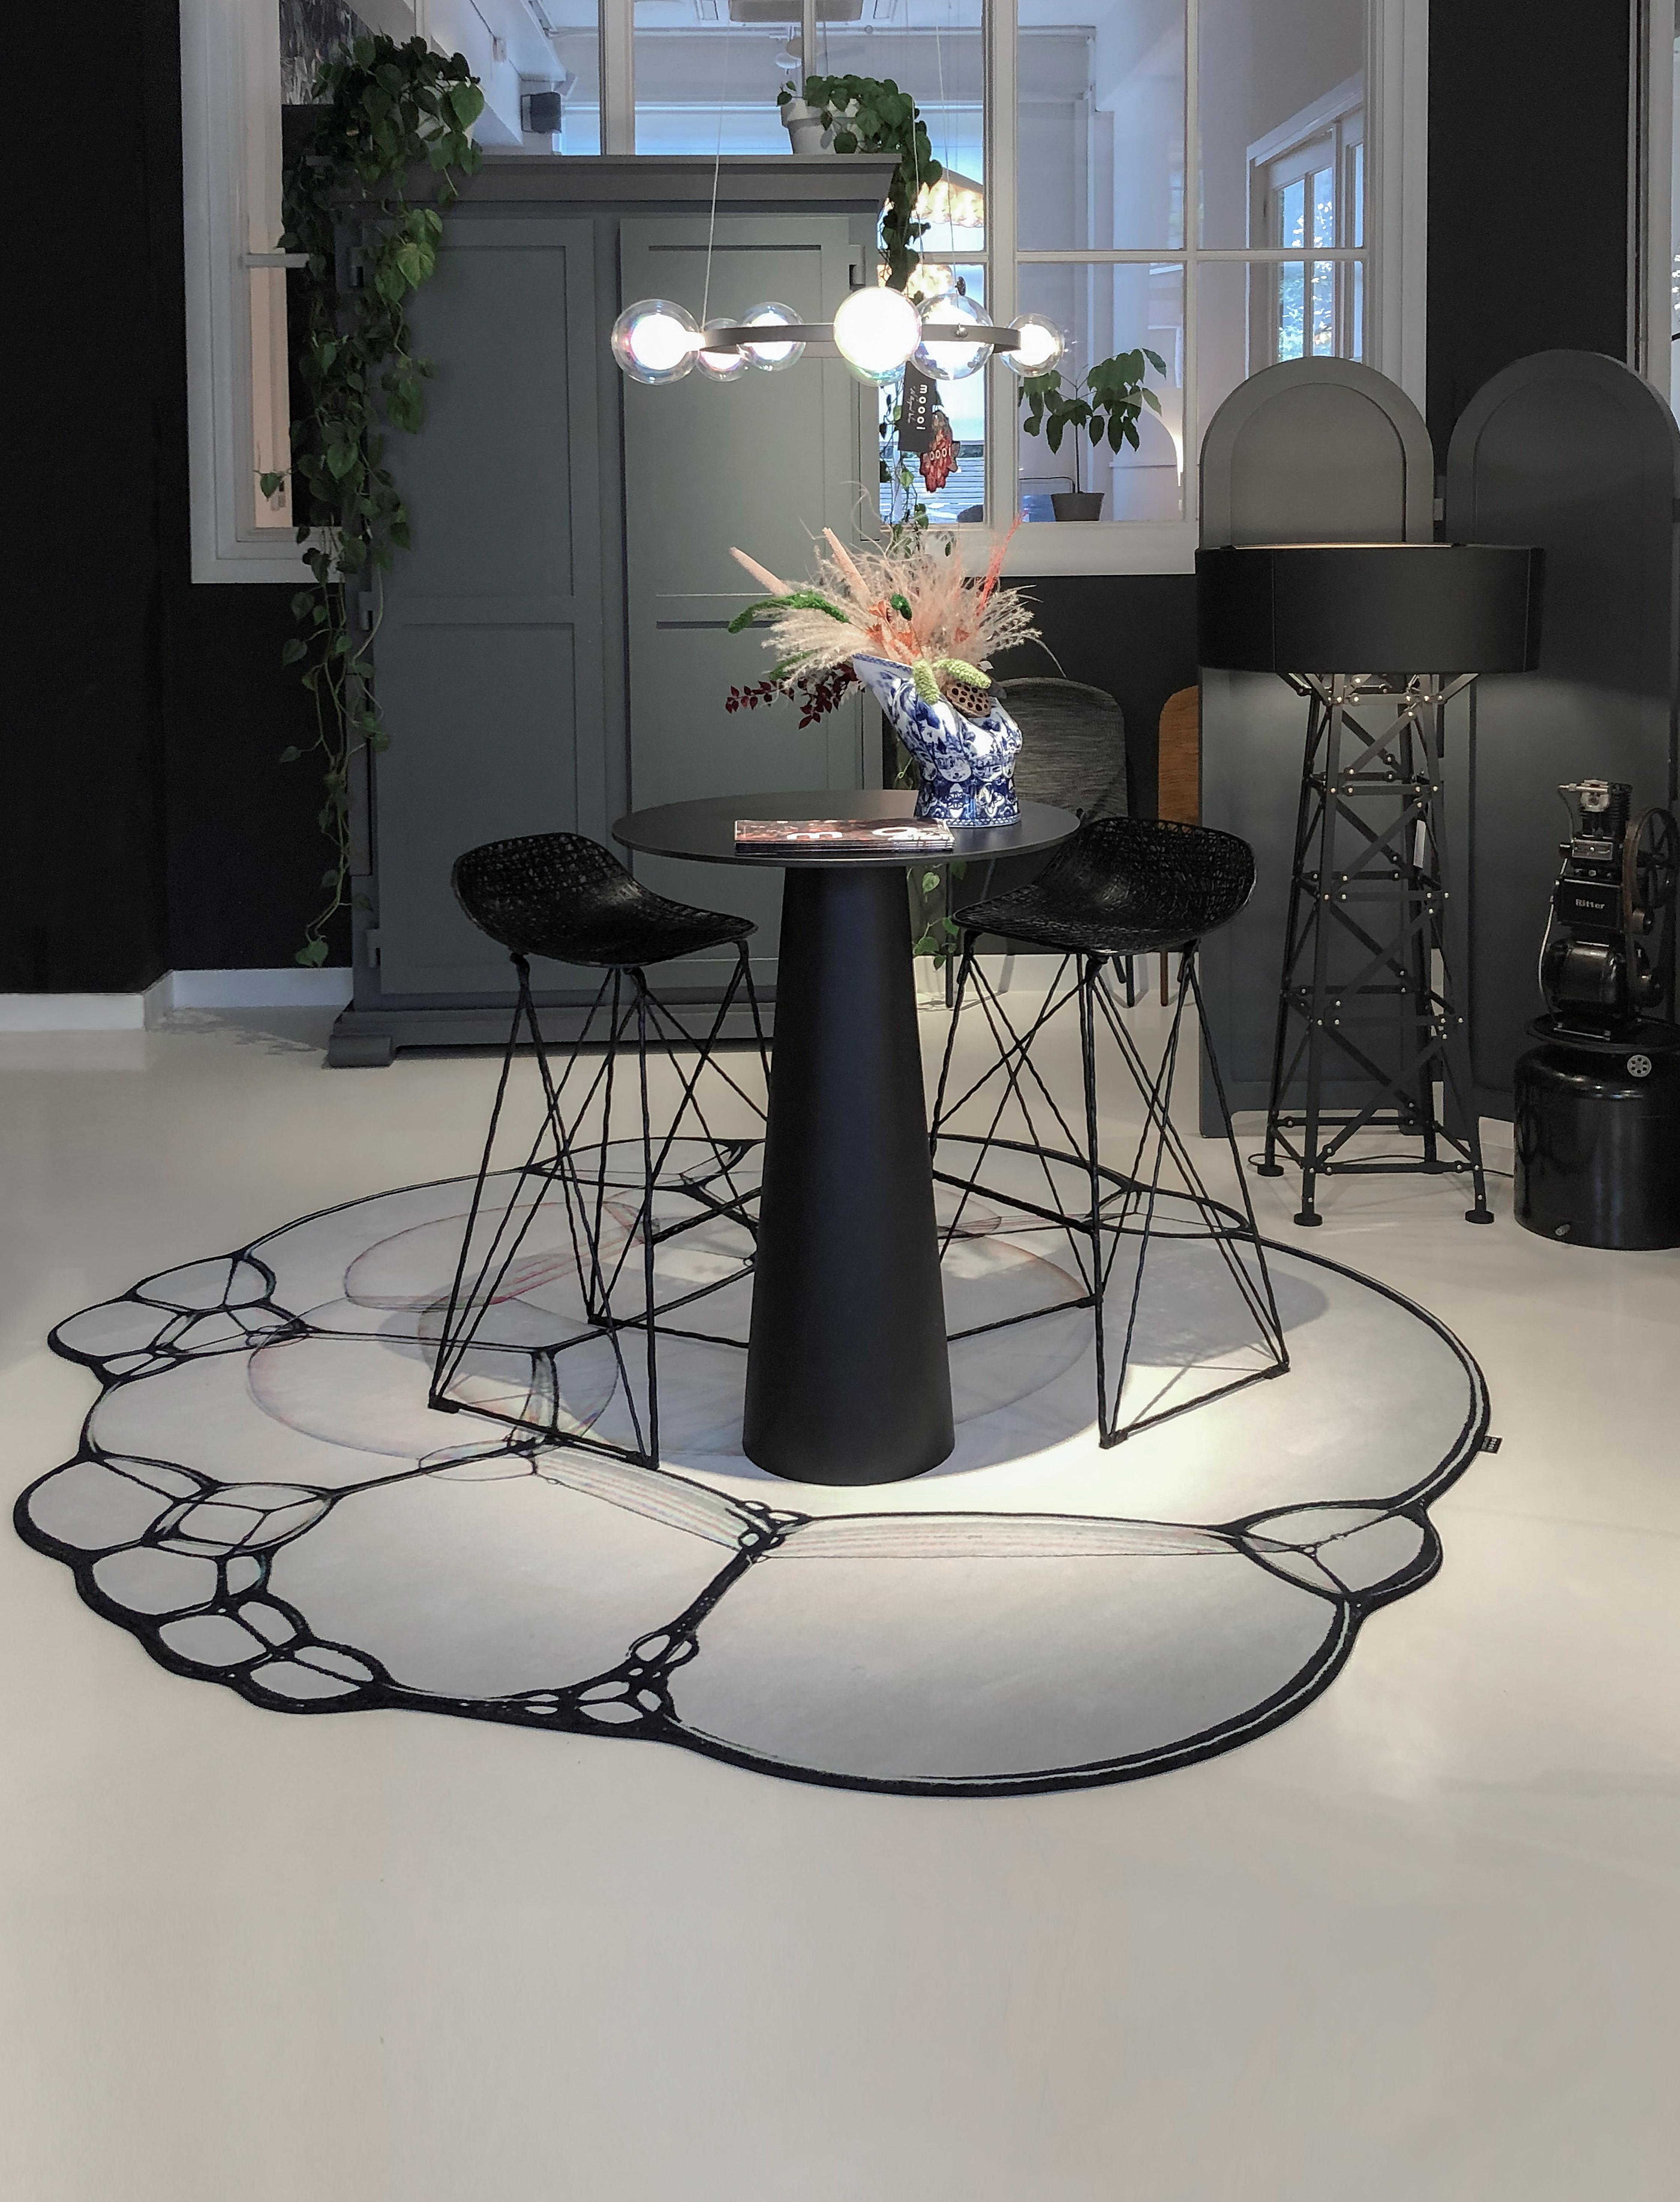 Moooi Large Bubble Natural Zoom rug in Soft Yarn Polyamide by Sjoerd Vroonland

Sjoerd Vroonland is a master of revised crafts and a remarkable furniture designer. Best known for his “extension chair” that became an instant icon of the Dutch